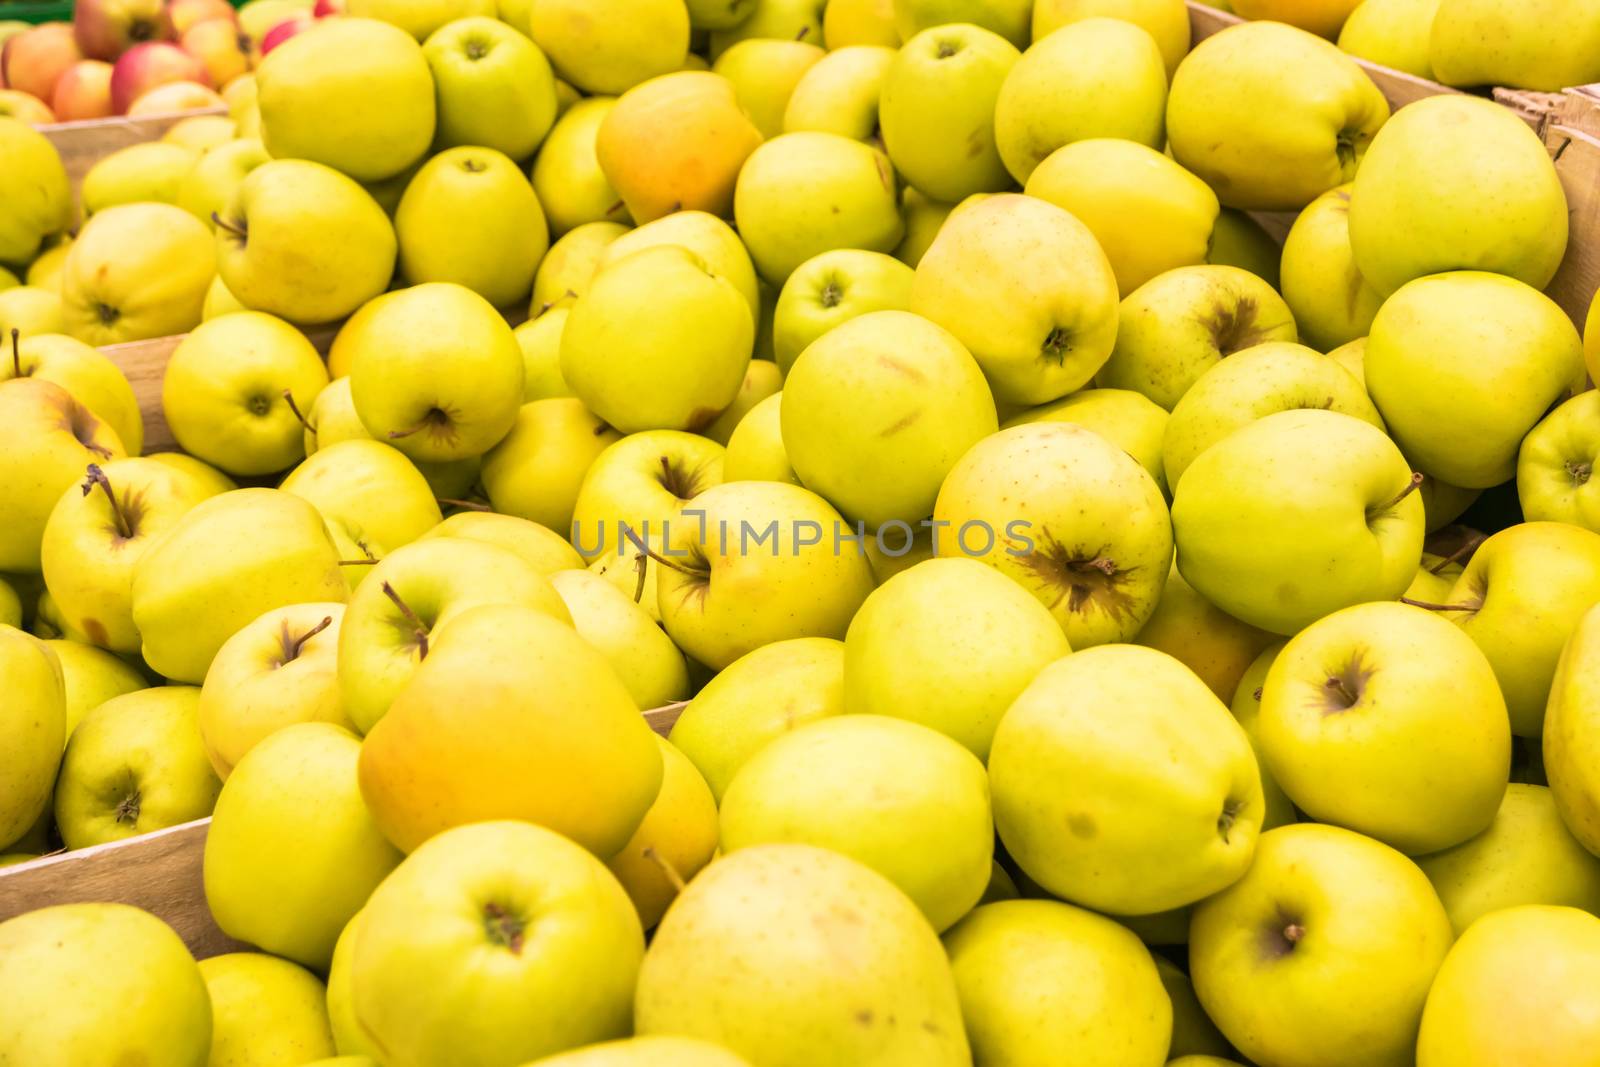 Pile of yellow fresh apples in a wooden crates at farmers market